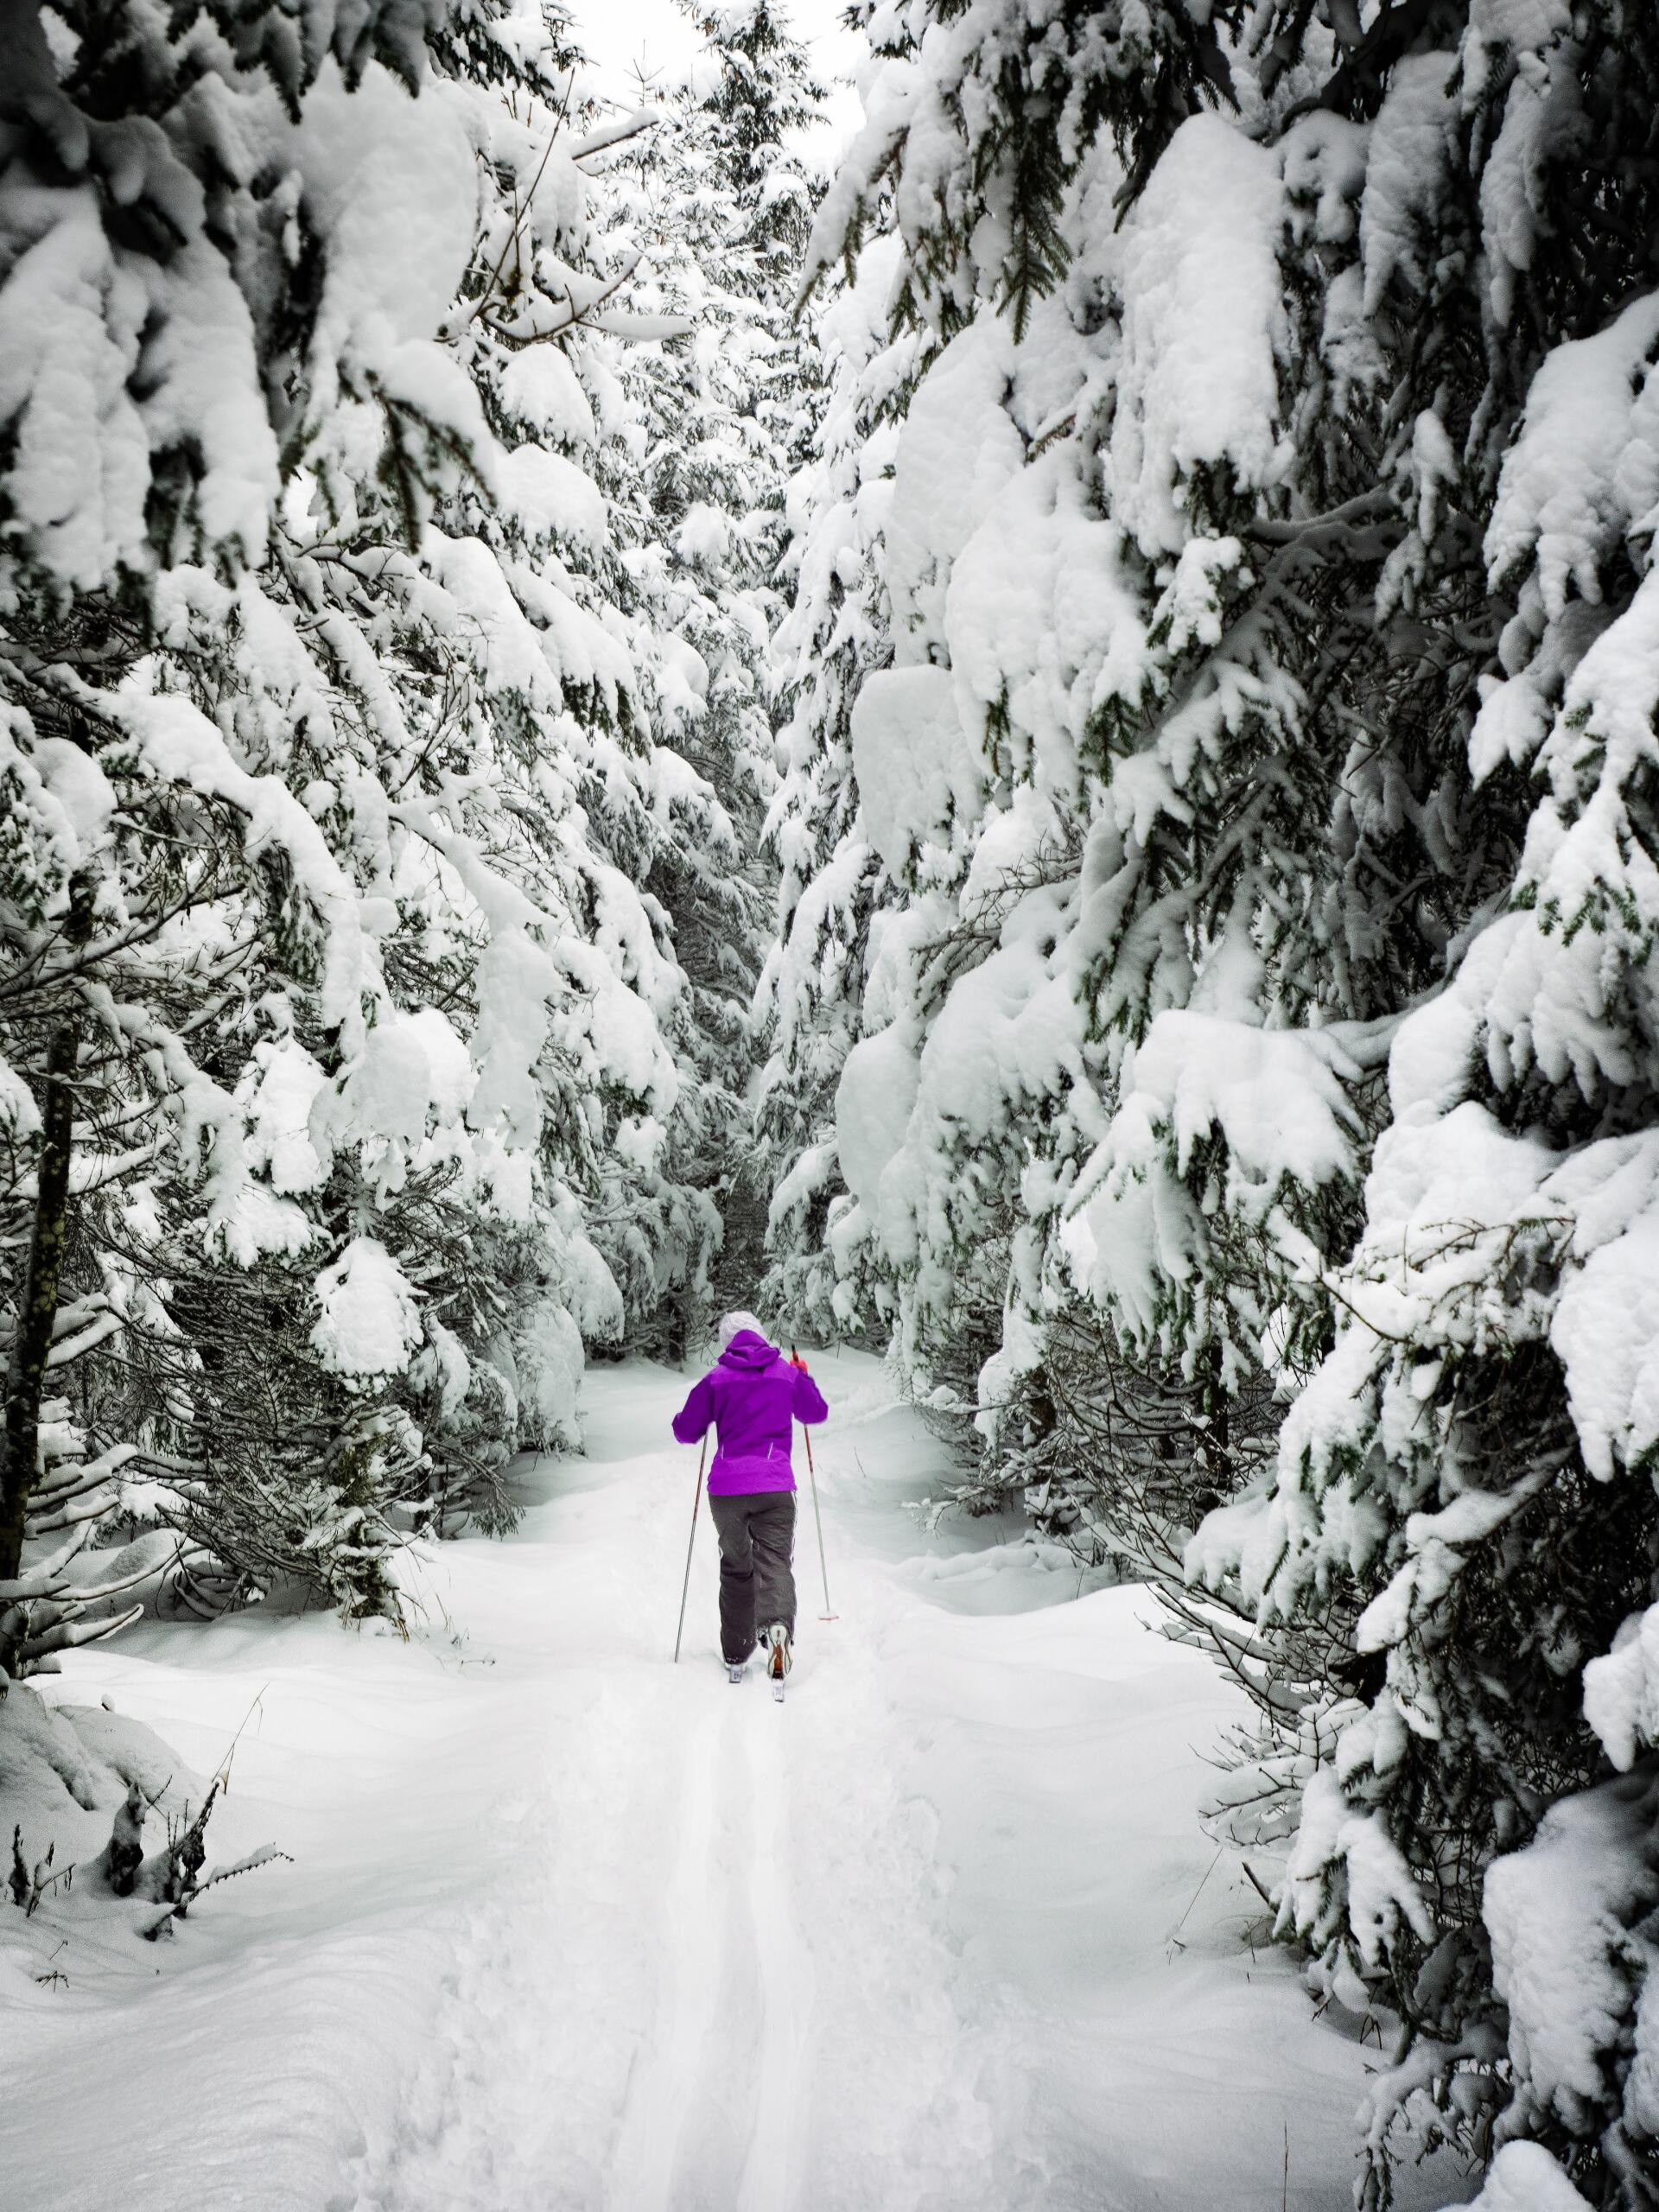 A person cross-country skiing on a trail between snow covered pine trees.